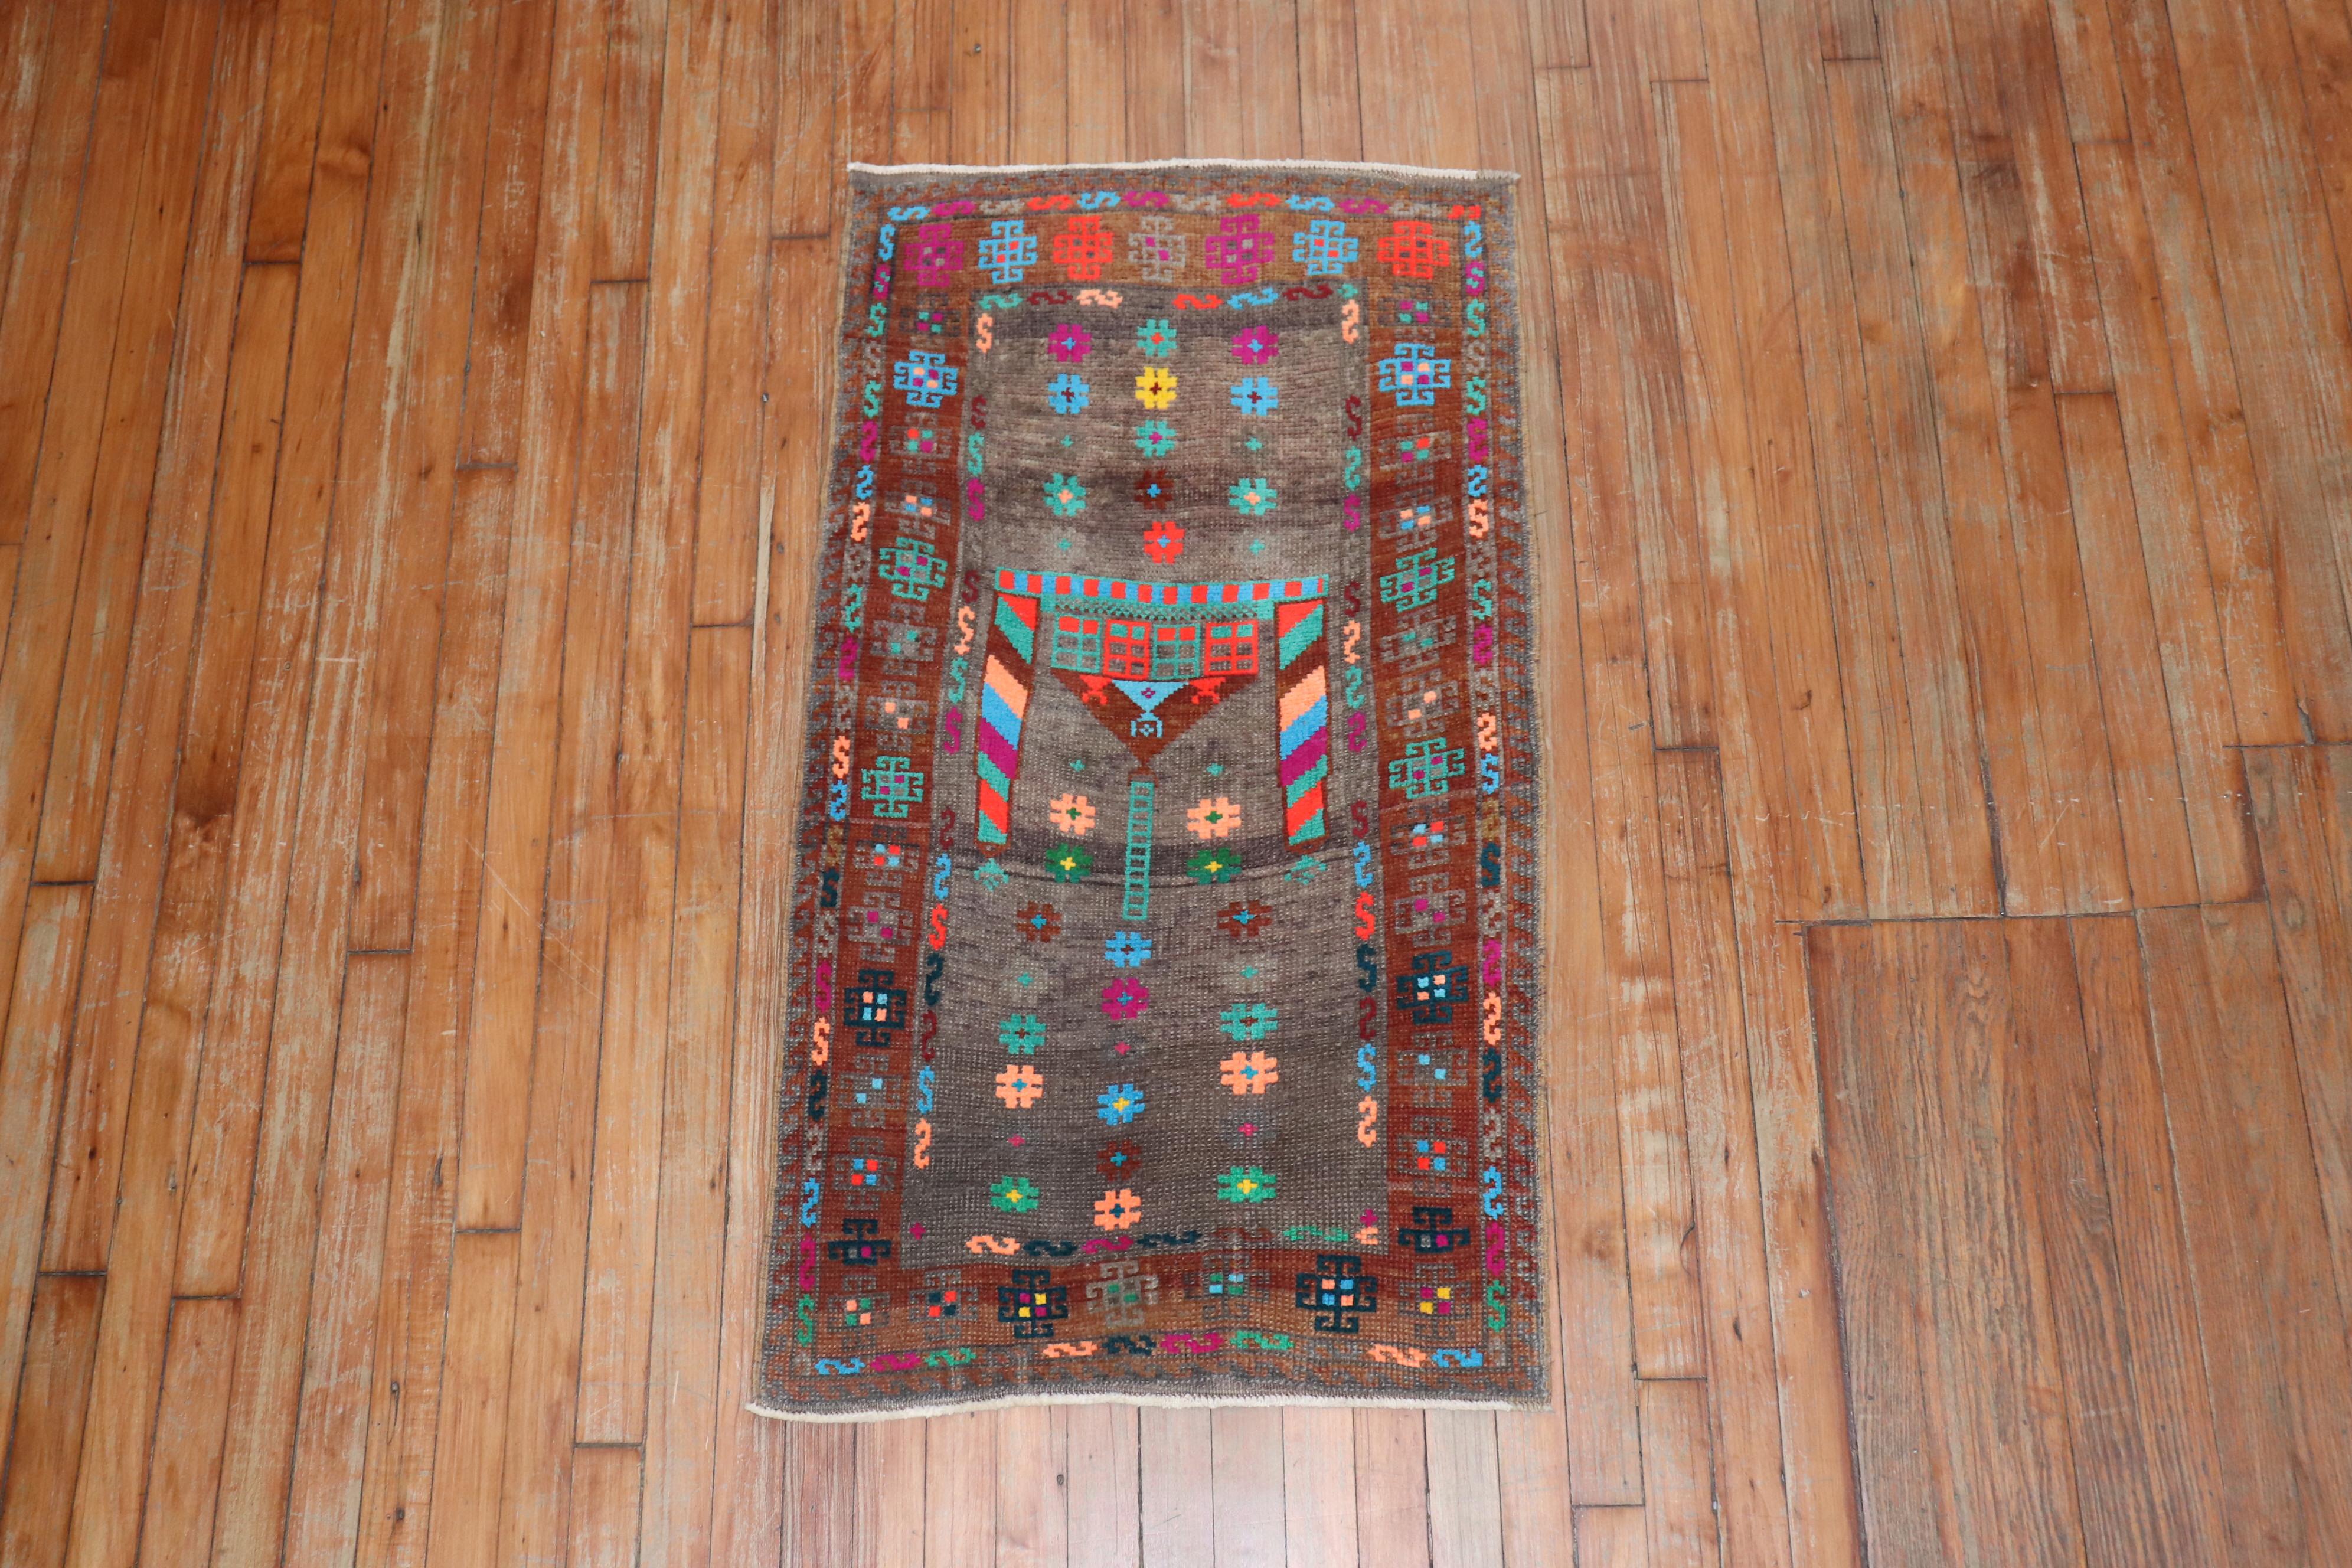 A vintage Anatolian Turkish rug mat with a brown field, cotton accents in electric blue, pink, teal, green, turquoise and orange

Measures: 2'2' x 3'11